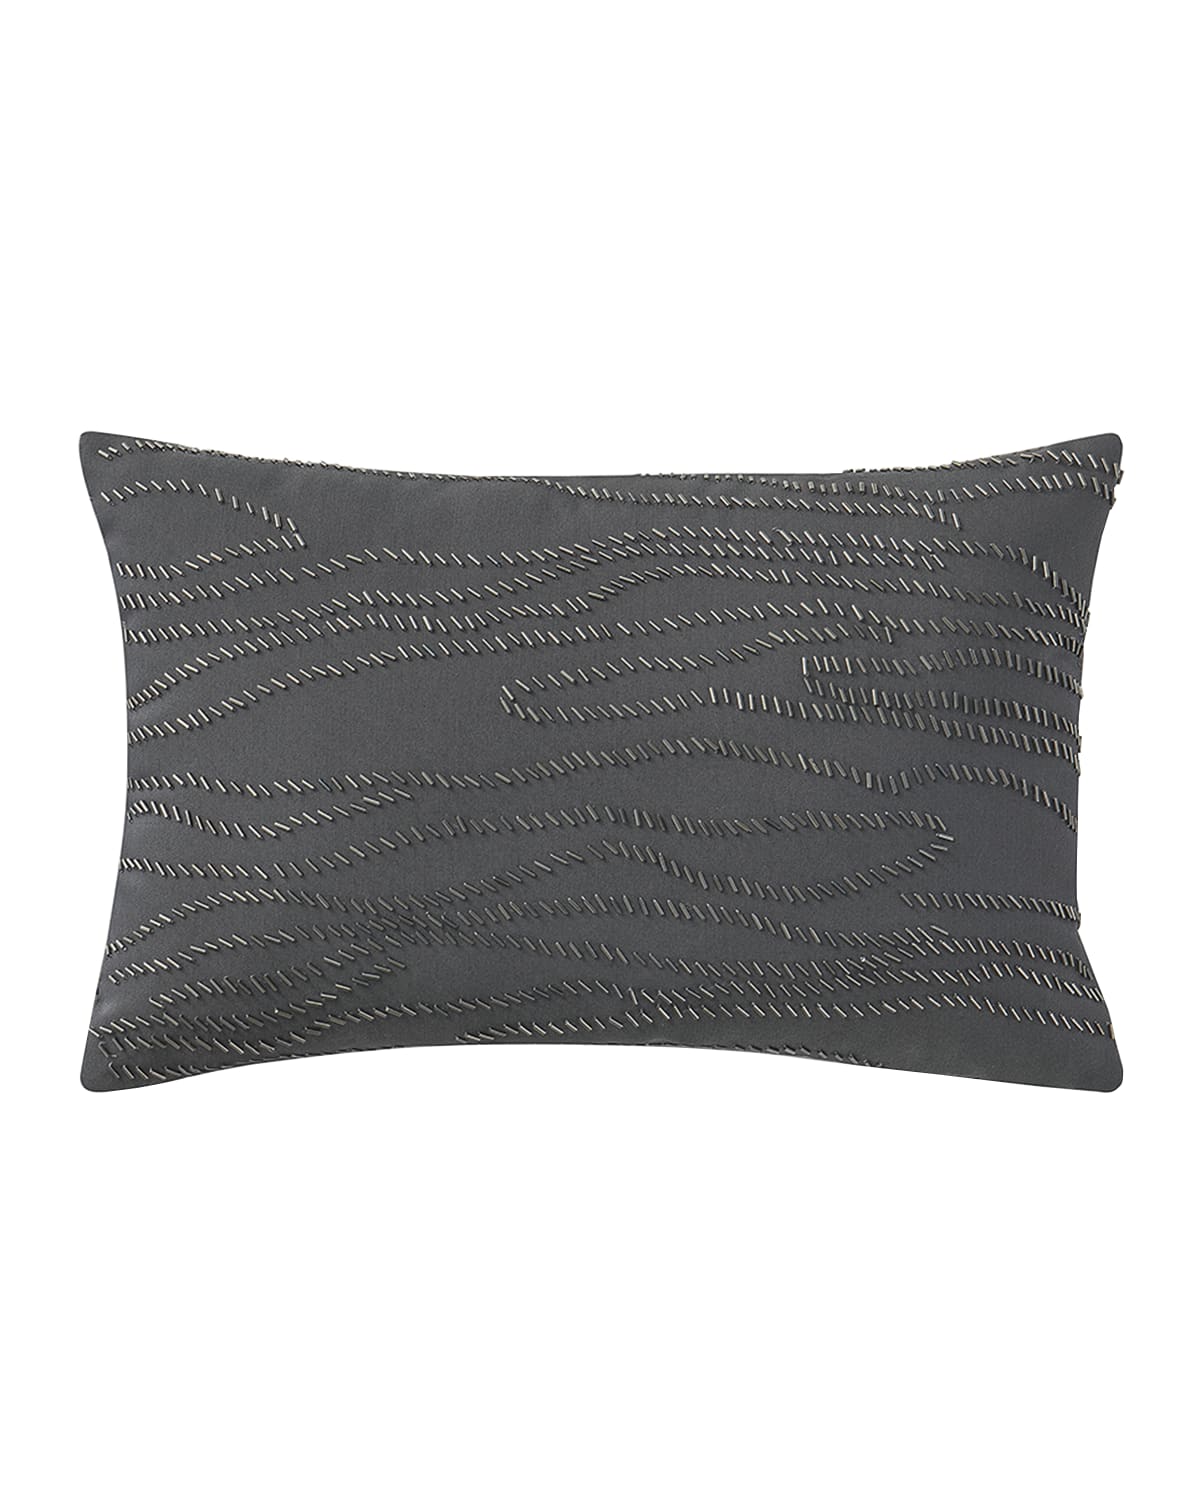 Image Waterford Beaded Blossom Pewter Pillow, 12" x 18"